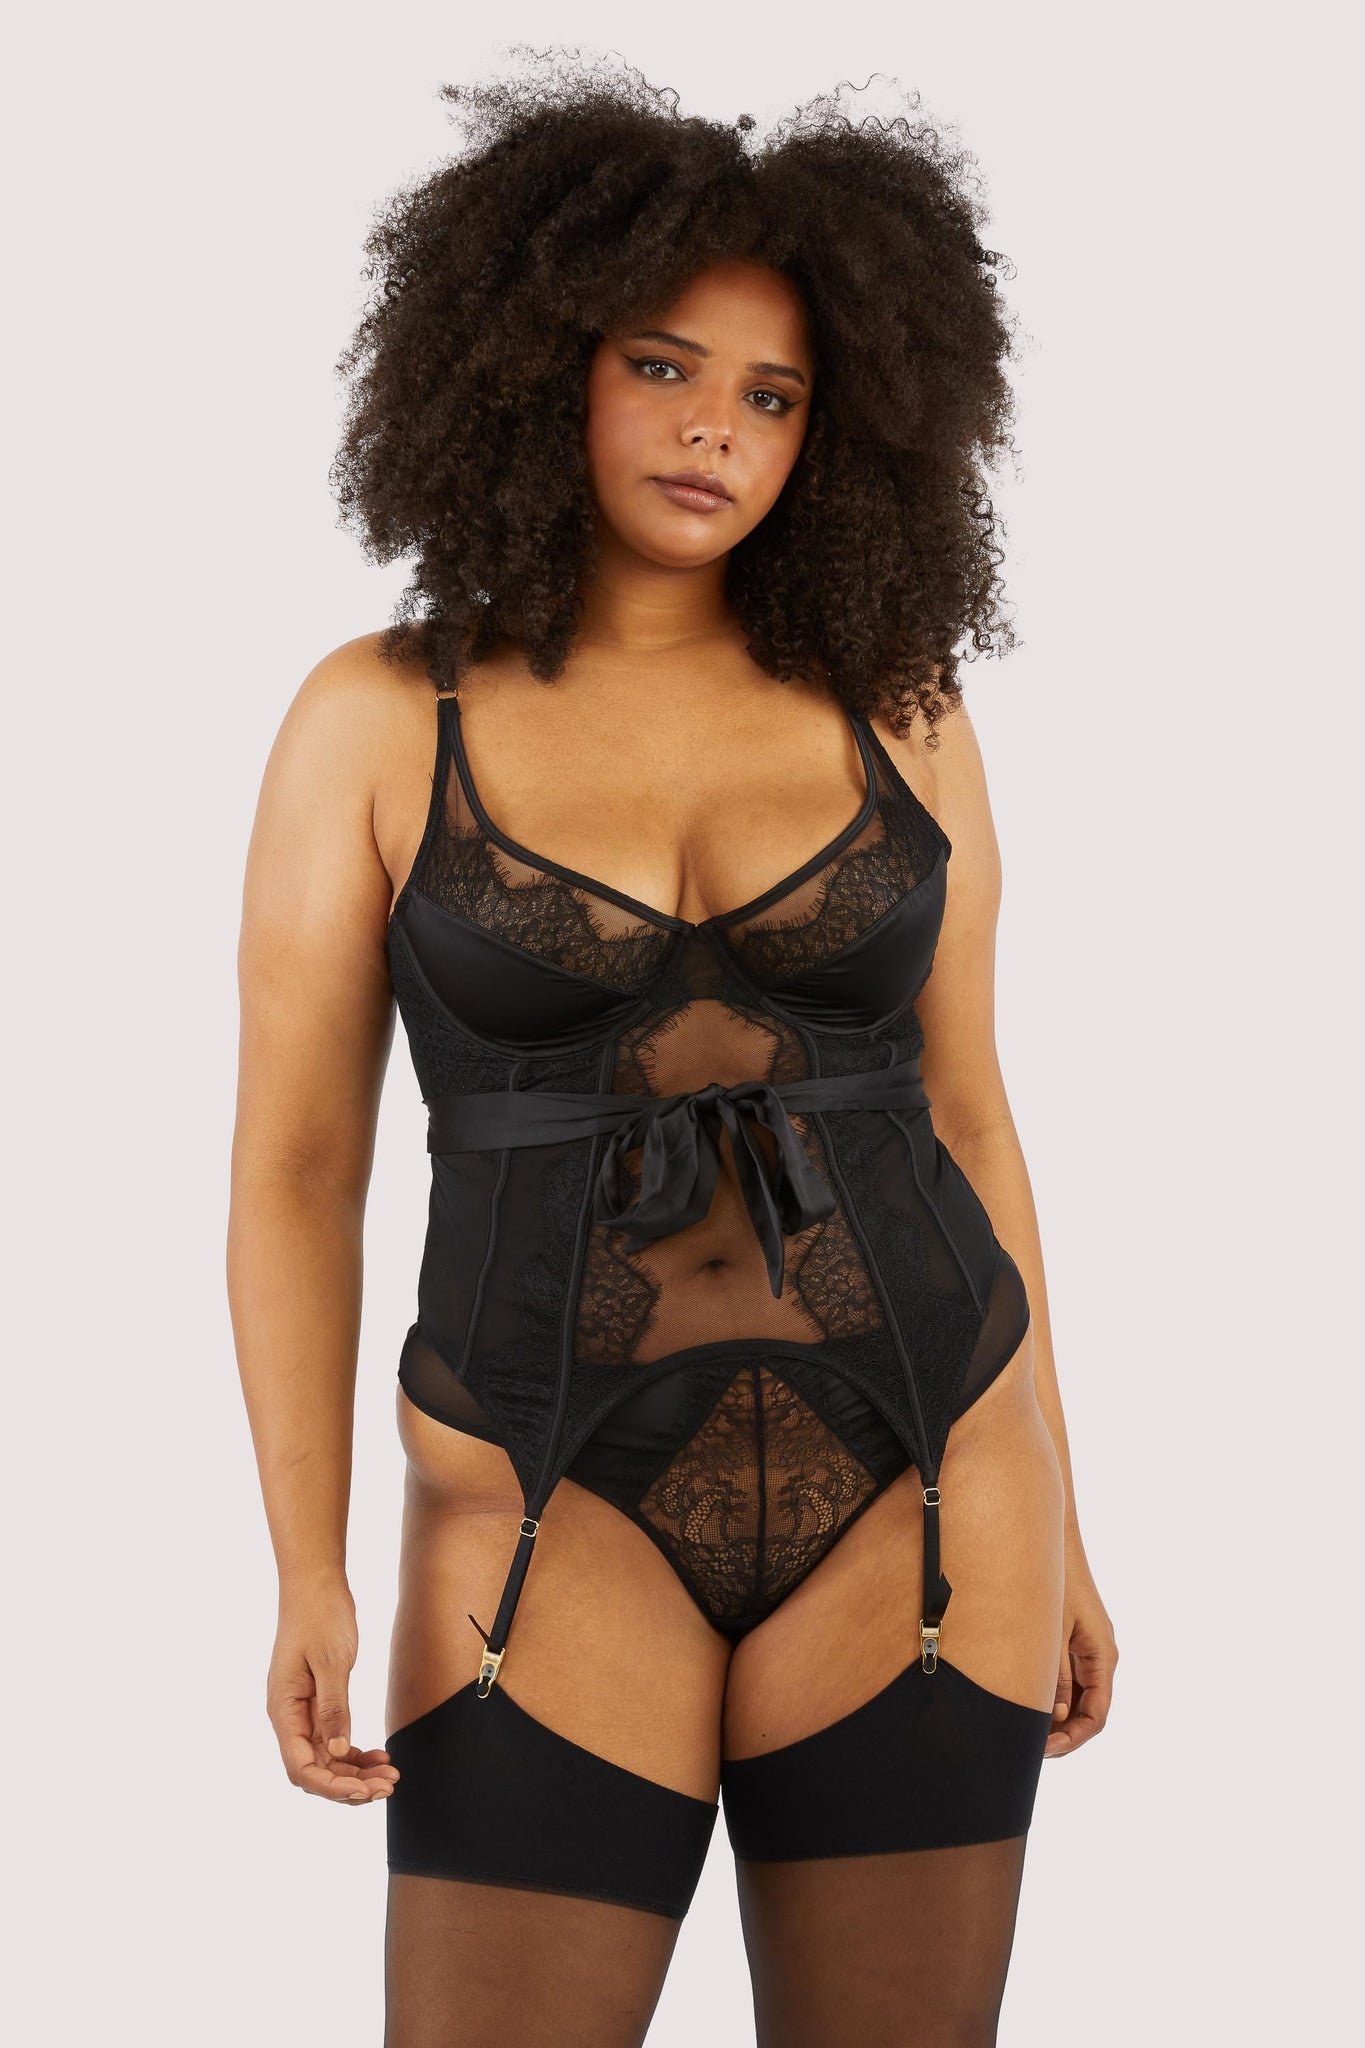 Hustler - Fabrice Black Lace And Mesh High Apex Basque With Bow Tie Bl –  Fiercewith Love